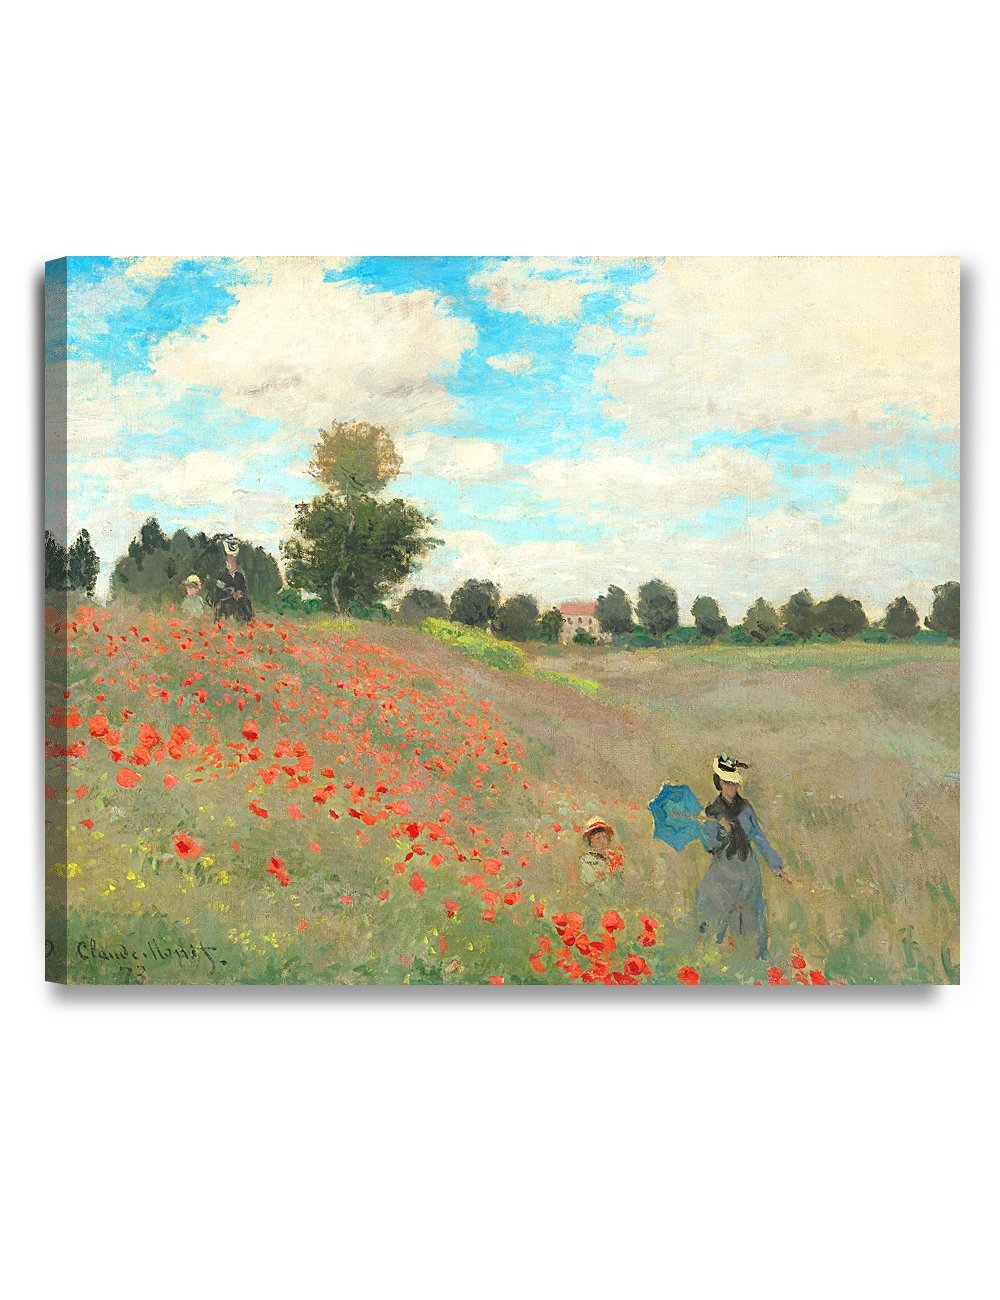 DecorArts - Poppies at Argenteuil, 1873, Claude Monet Art Reproduction. Giclee Canvas Prints Wall Art for Home Decor 30x24"